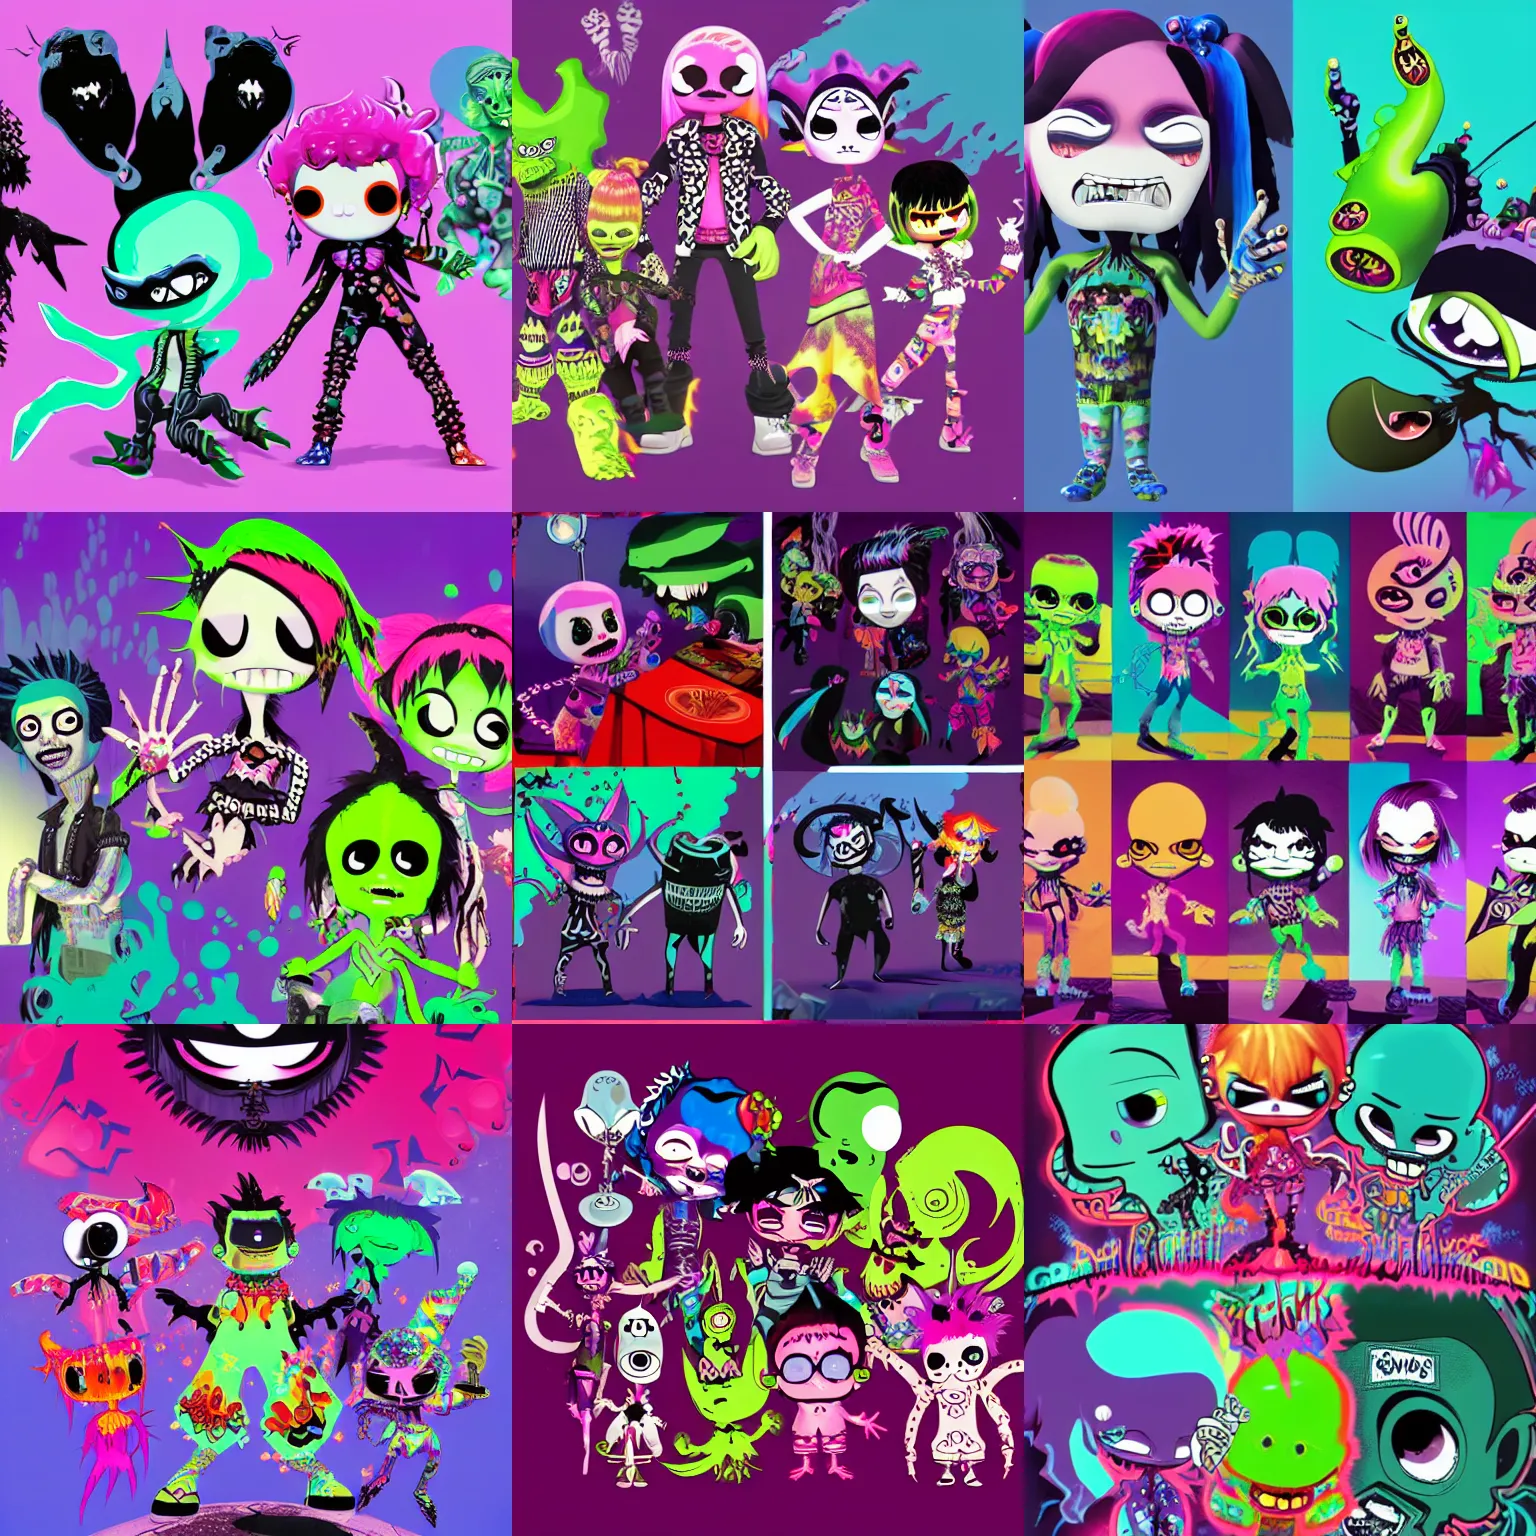 Prompt: CGI lisa frank gothic punk vampiric rockstar underwater caustics vampire squid character designs of various shapes and sizes by genndy tartakovsky and ruby gloom by martin hsu and the creators of fret nice being overseen by Jamie Hewlett from gorillaz for splatoon by nintendo